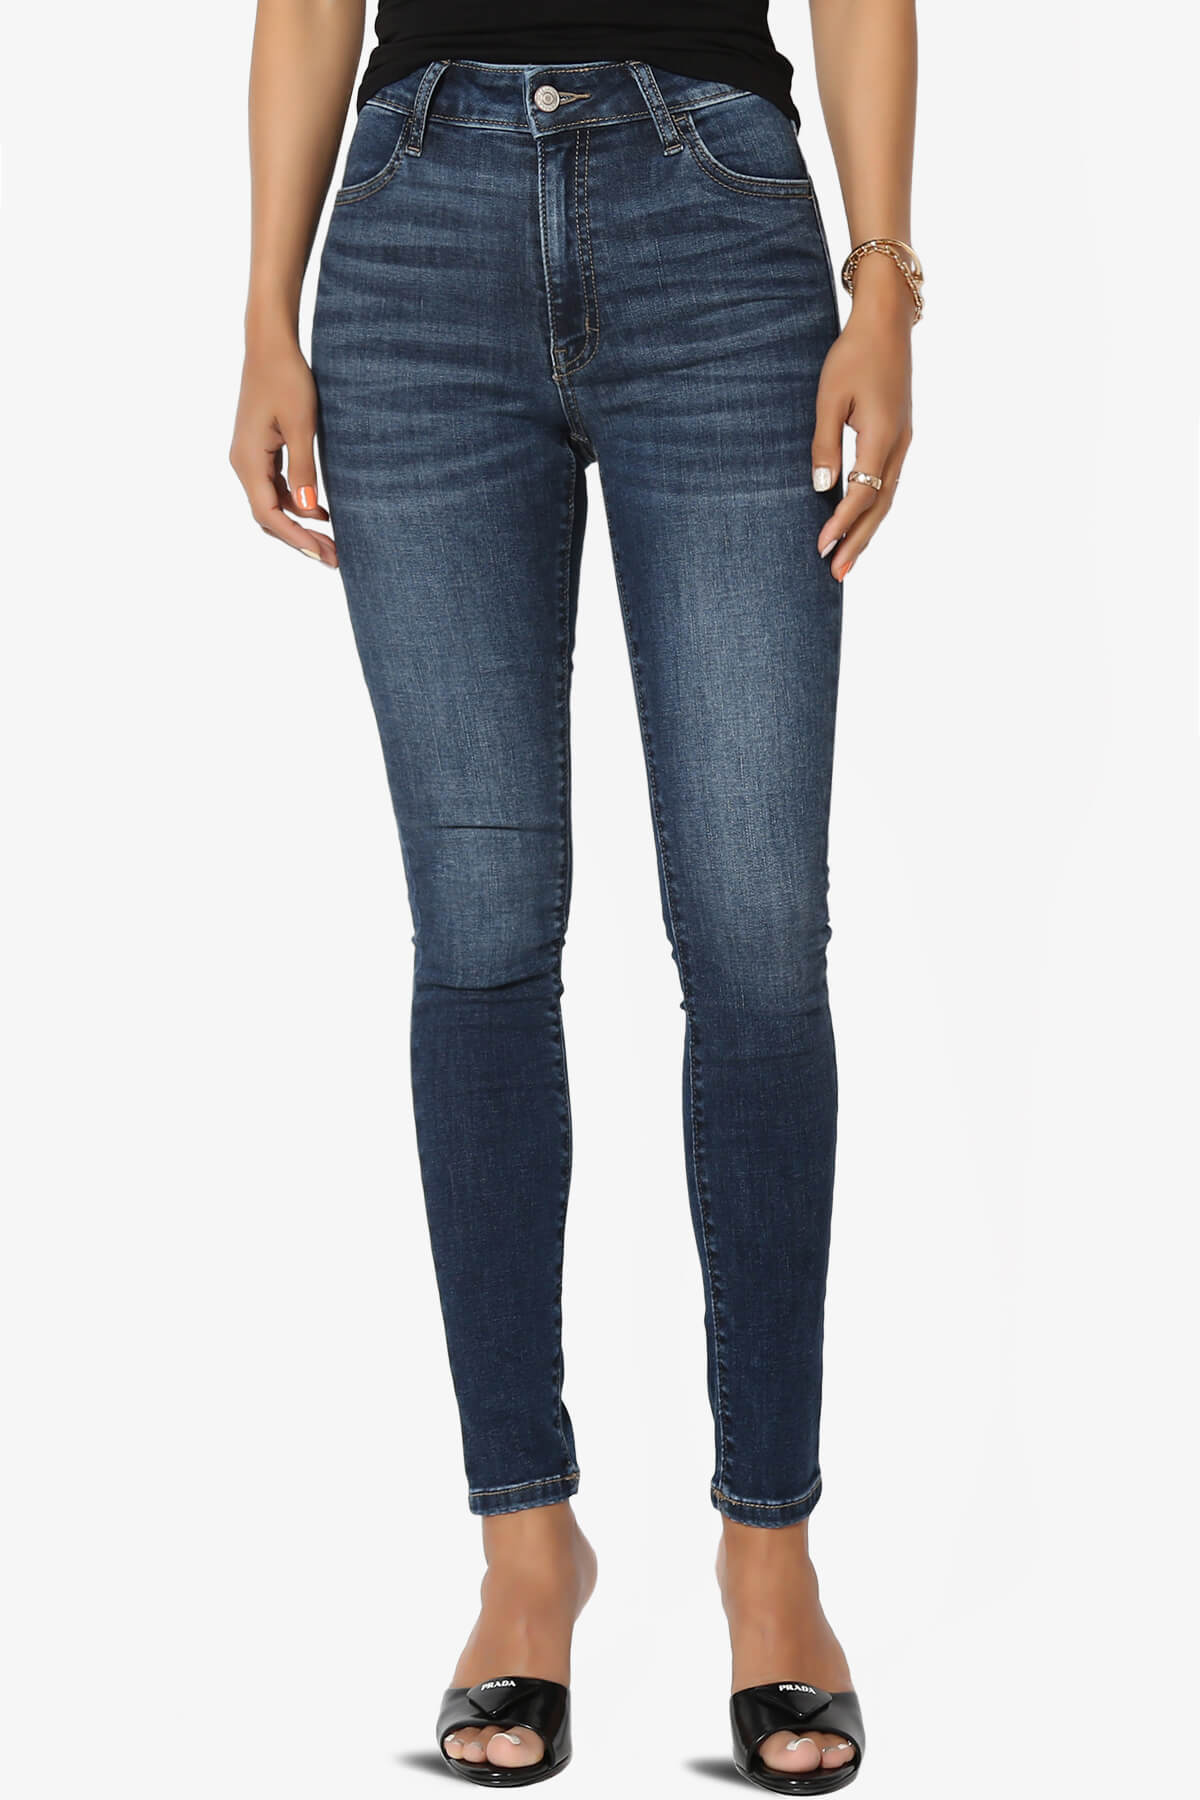 Load image into Gallery viewer, Cherish High Rise Extra Stretch Skinny Jeans DARK_1
